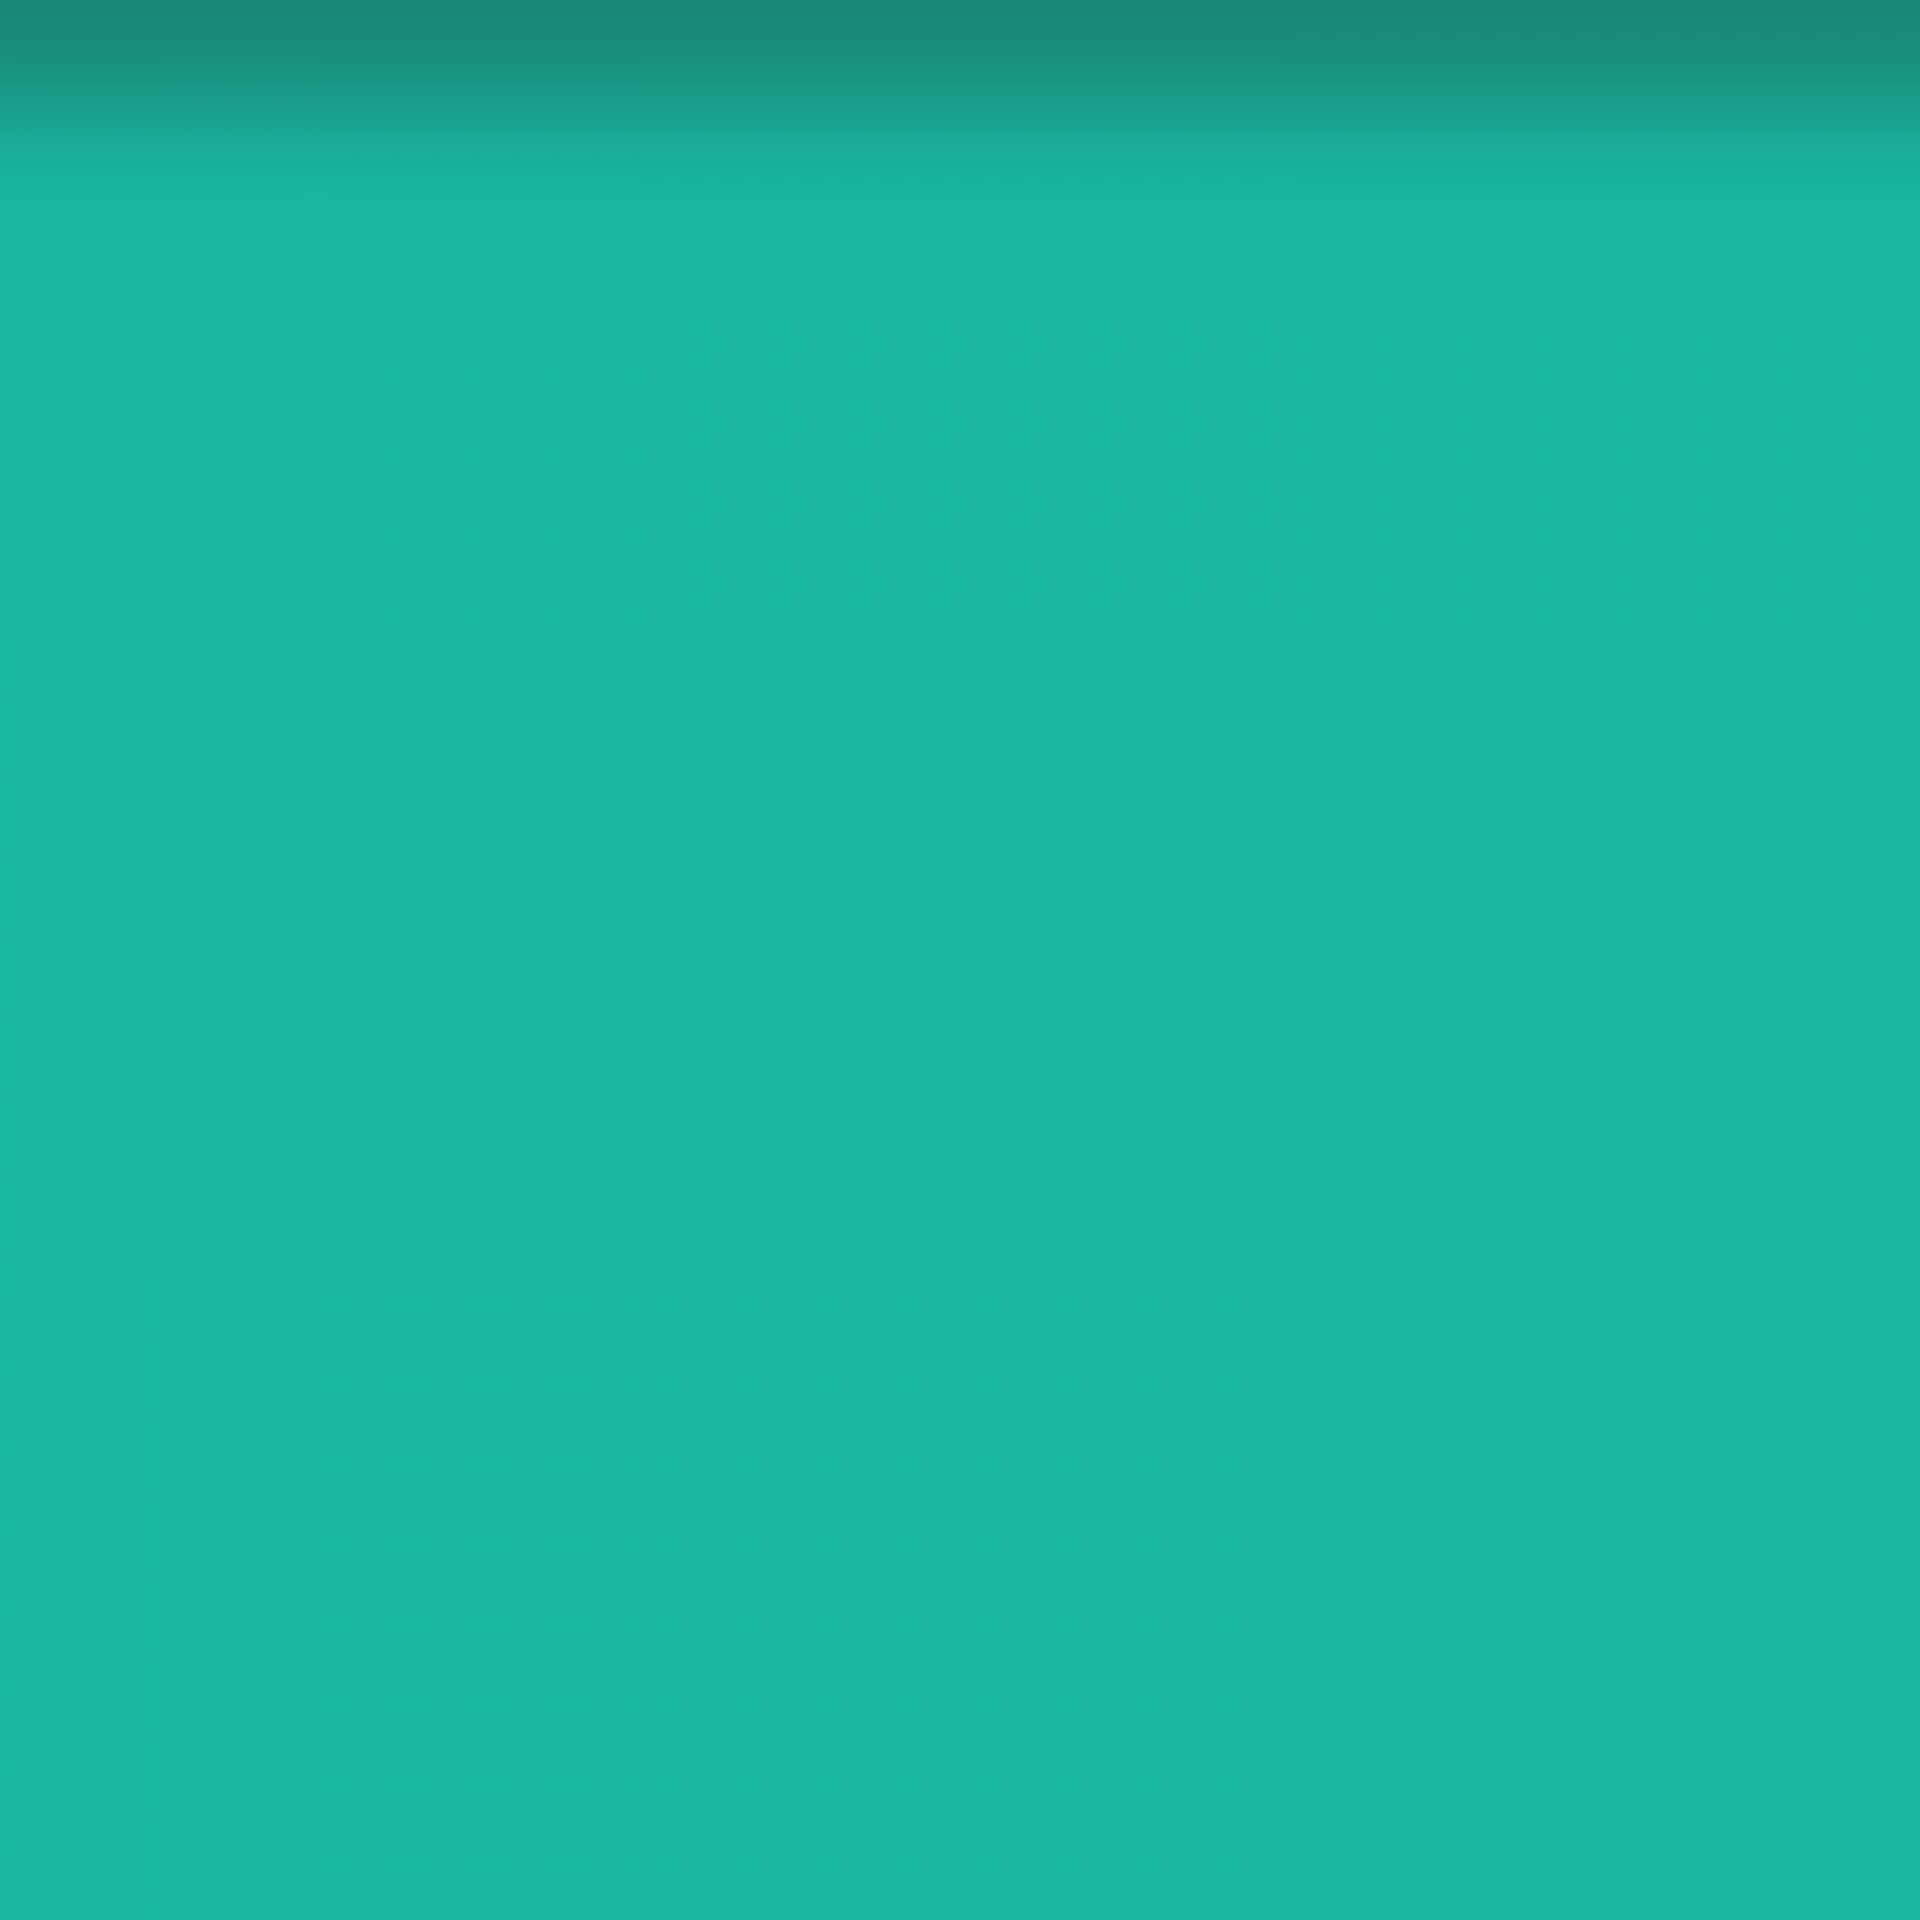 Soft Turquoise Green Plain Zoom Background